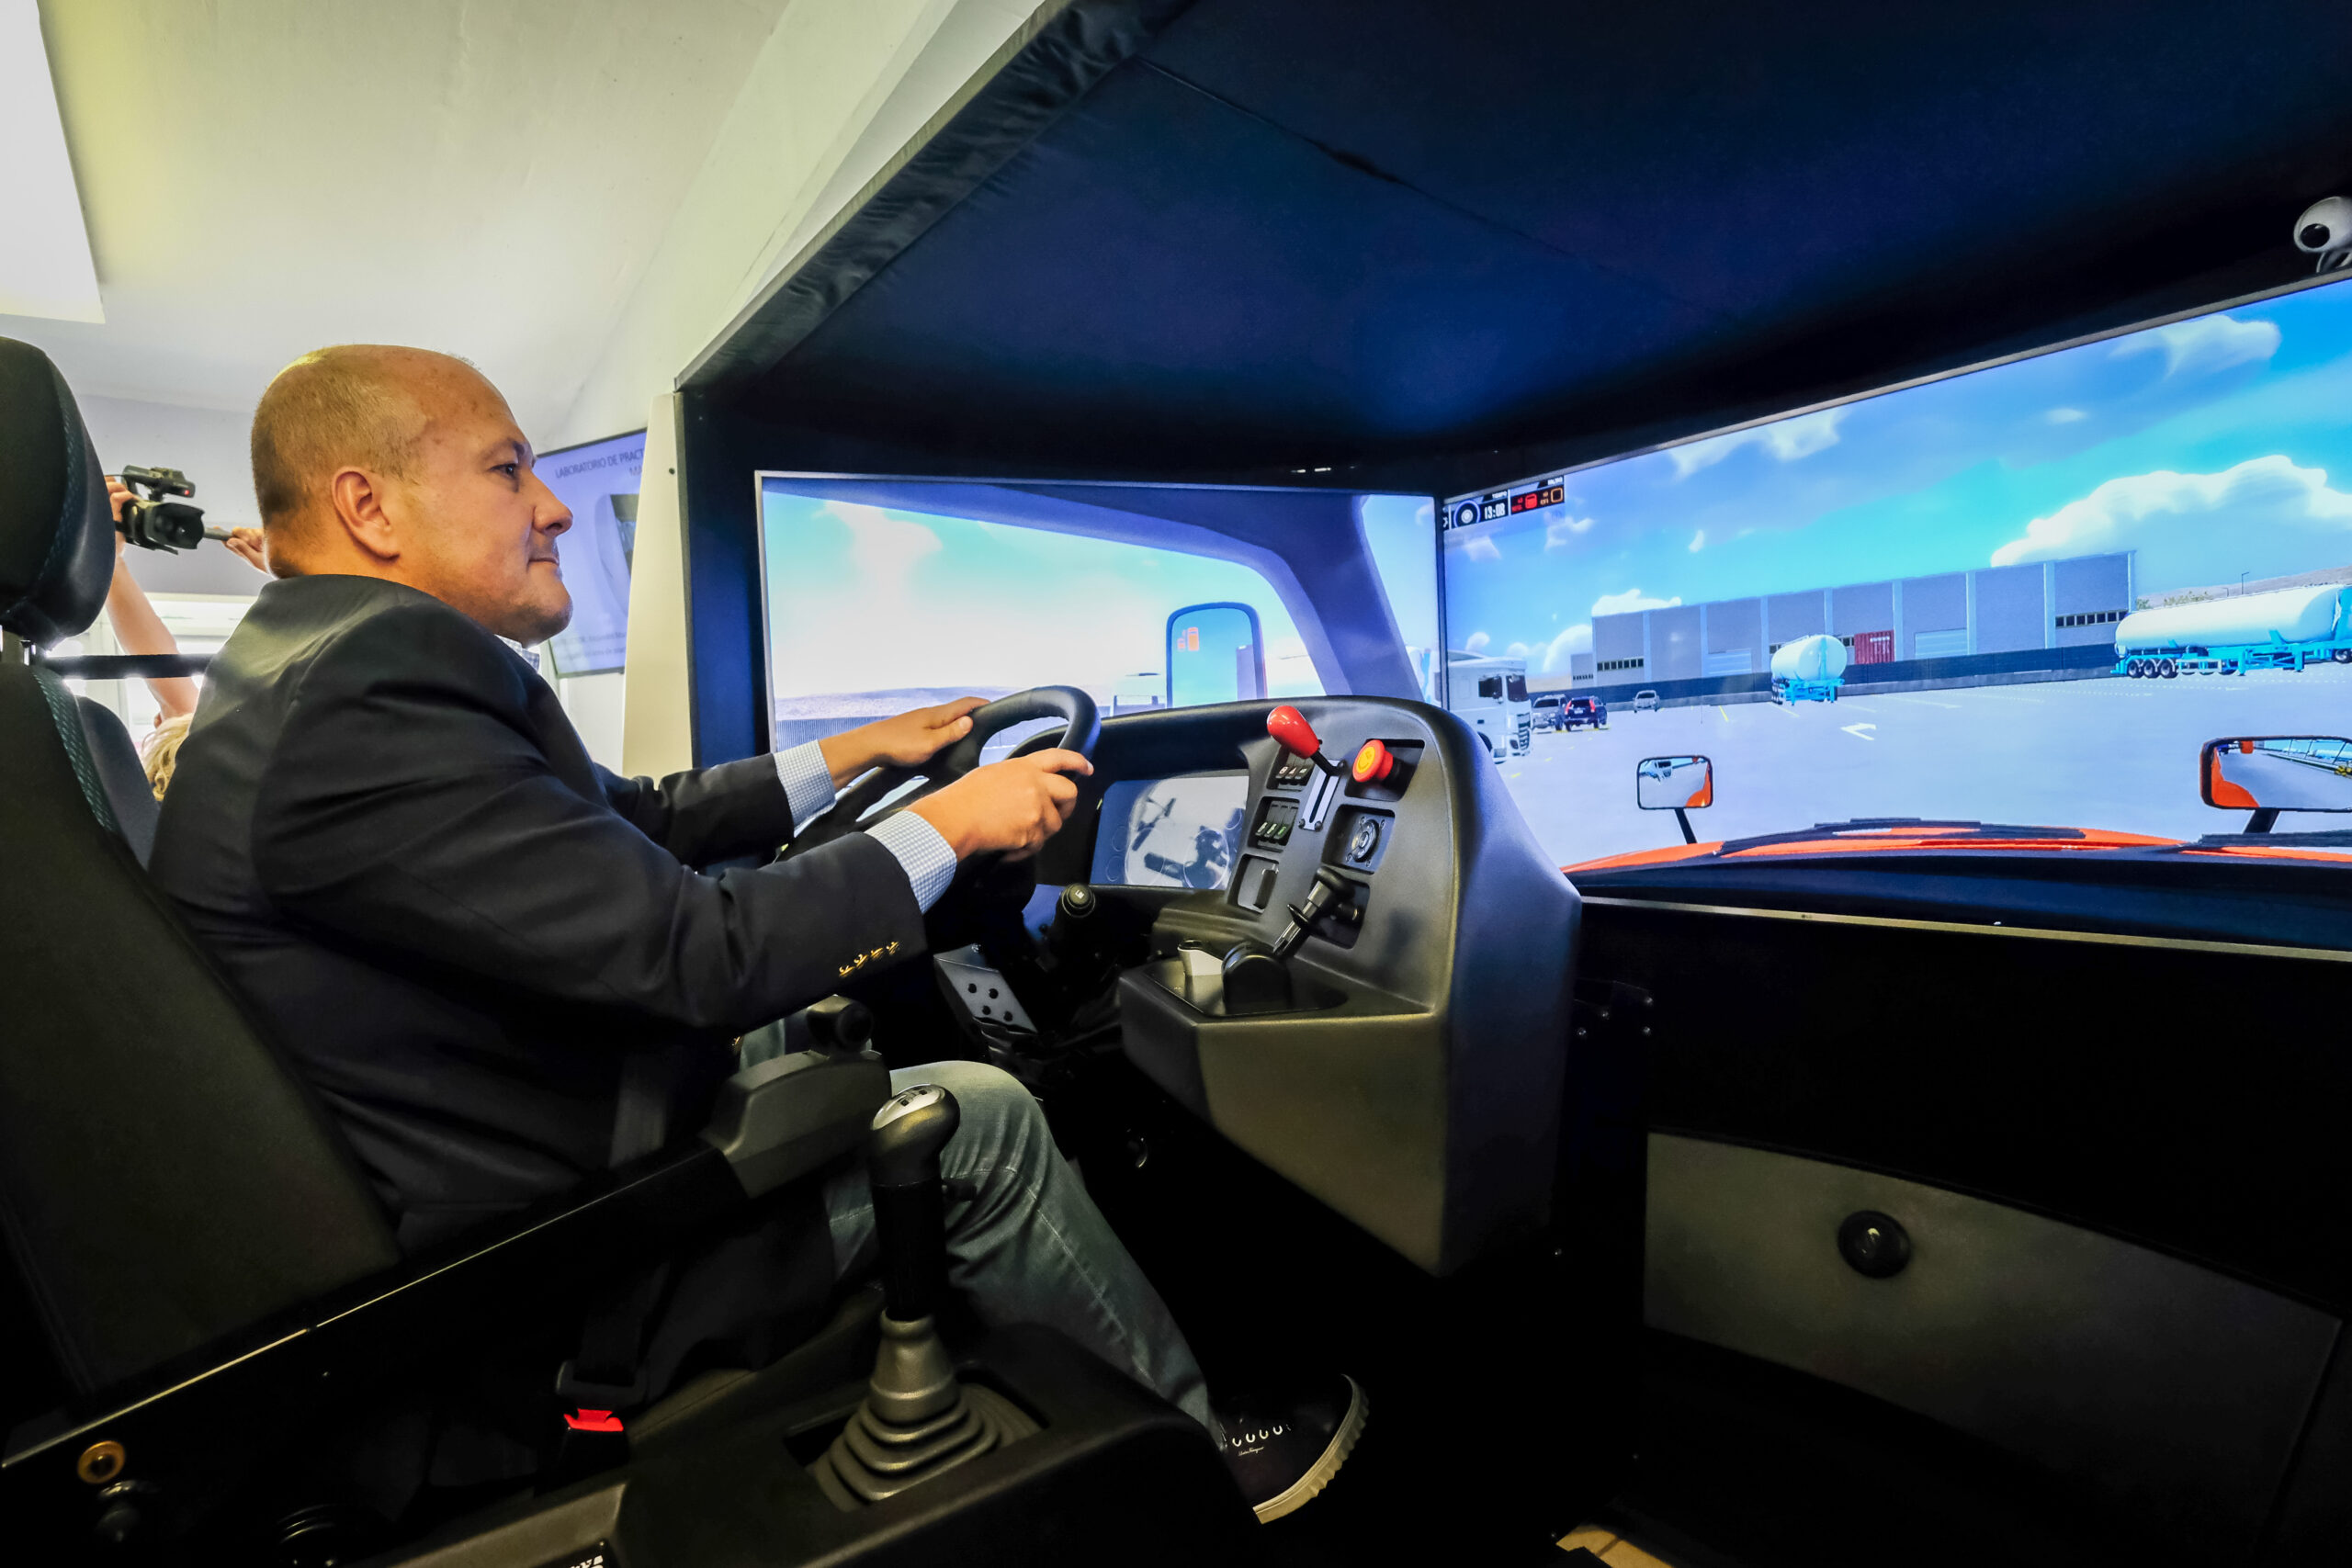 Truck simulator at the IDEFT in Jalisco inaugurated by Enrique Alfaro, Governor